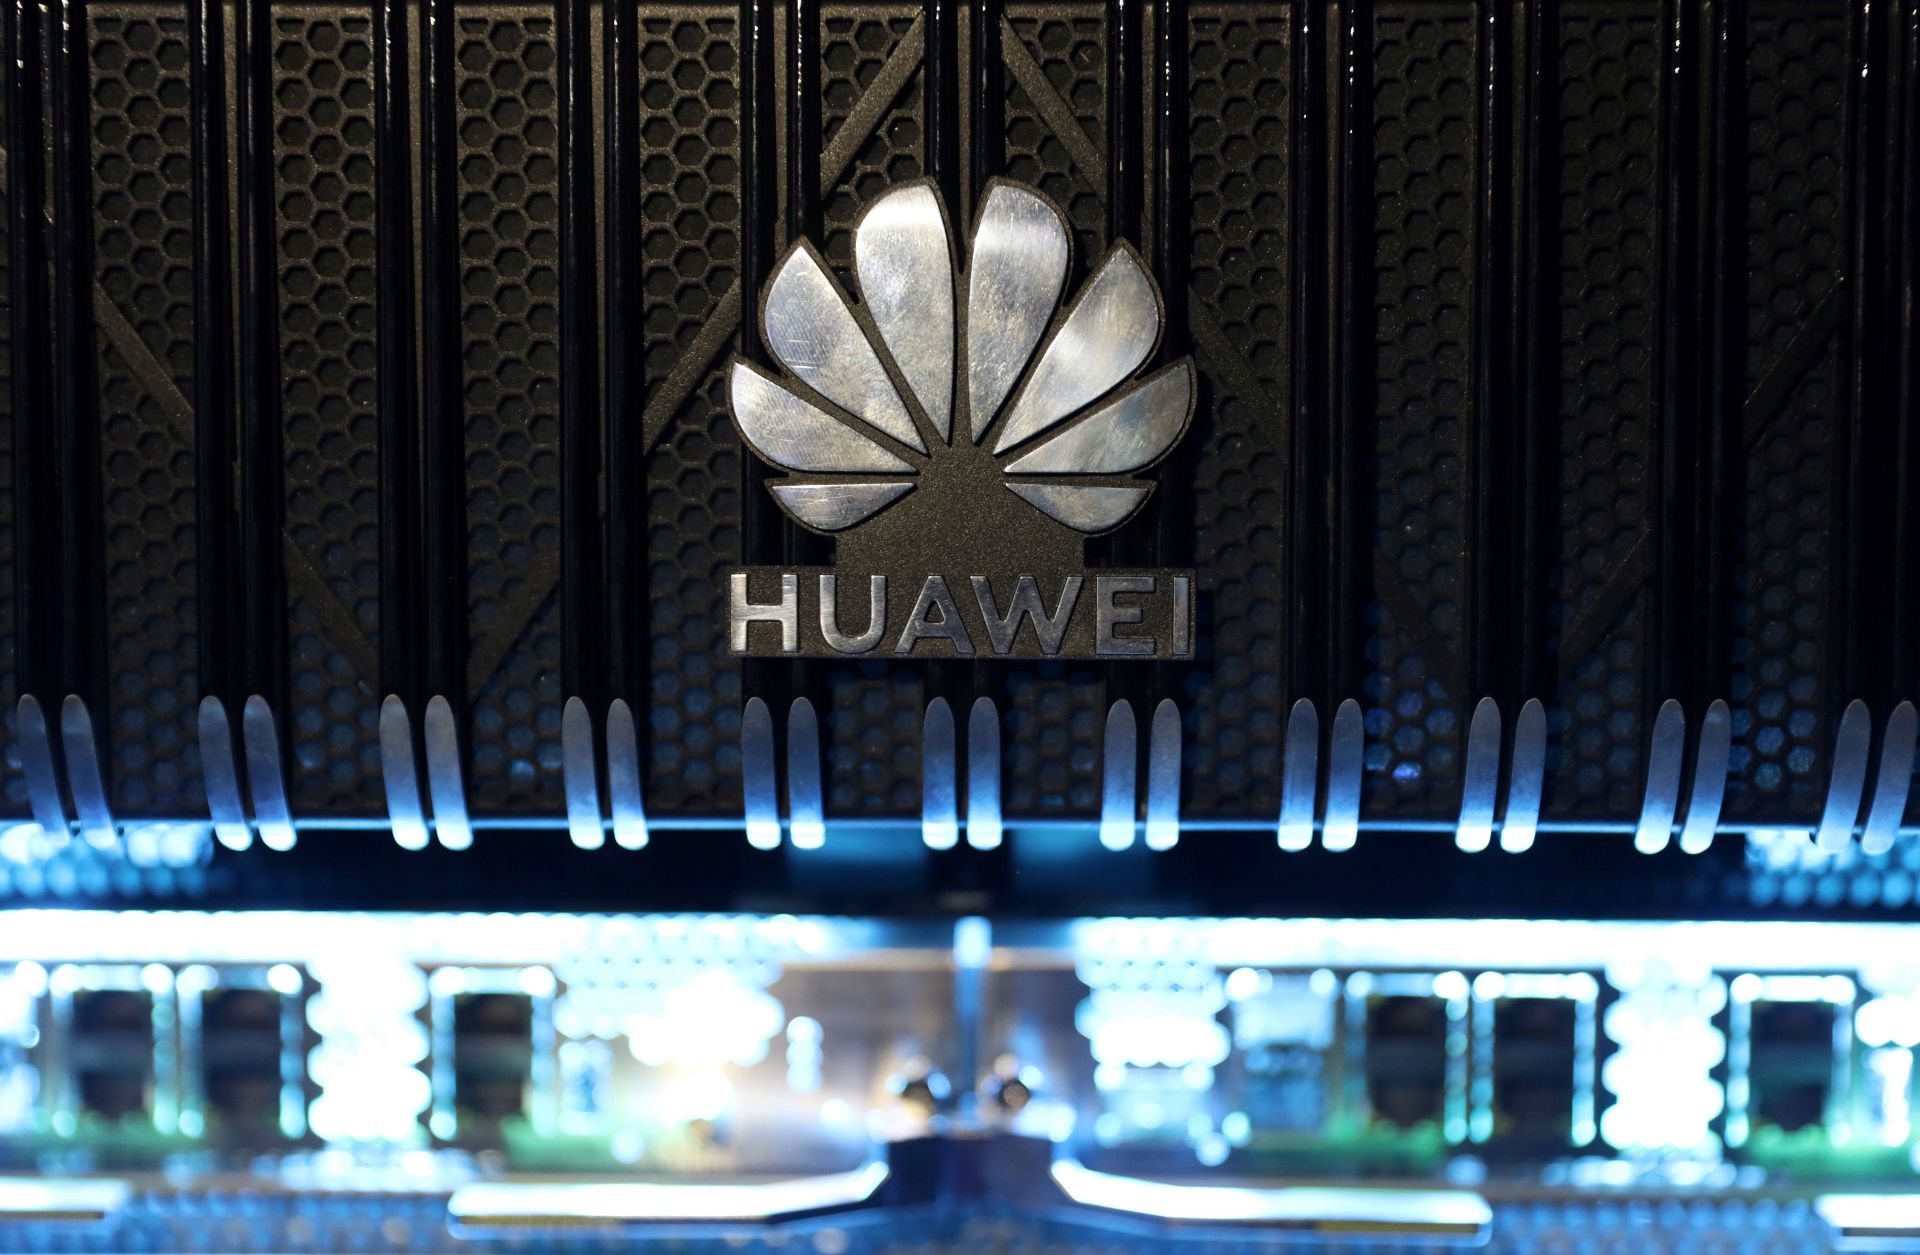 The Huawei logo is pictured on a router during a 5G event in London on Feb. 20, 2020.